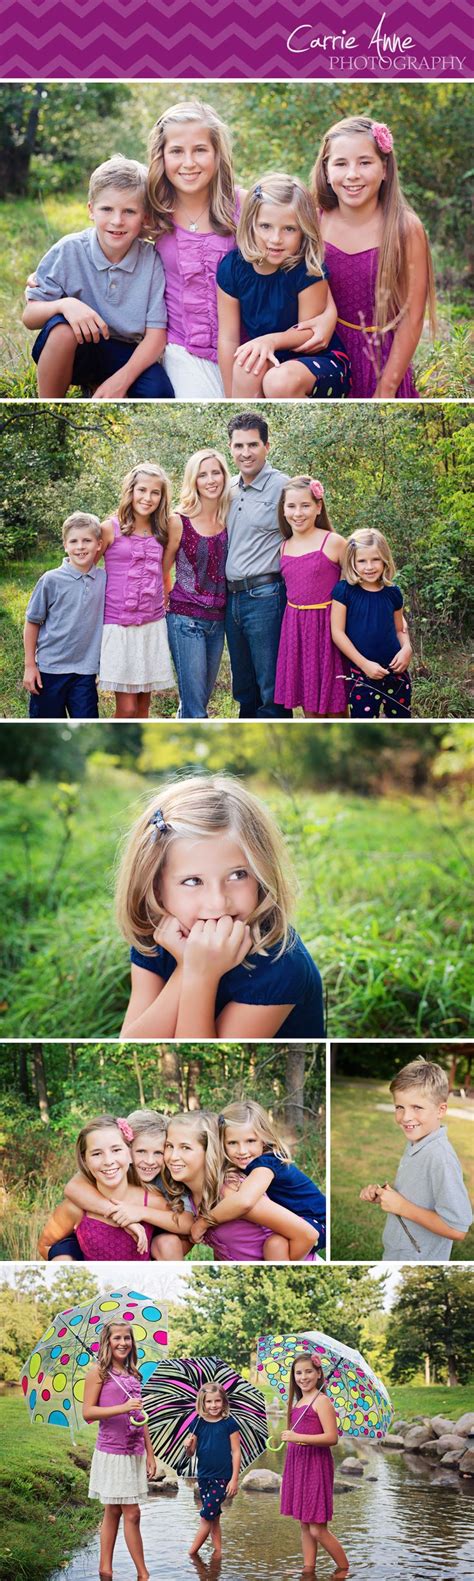 home carrie anne photography summer family pictures family photo colors summer family